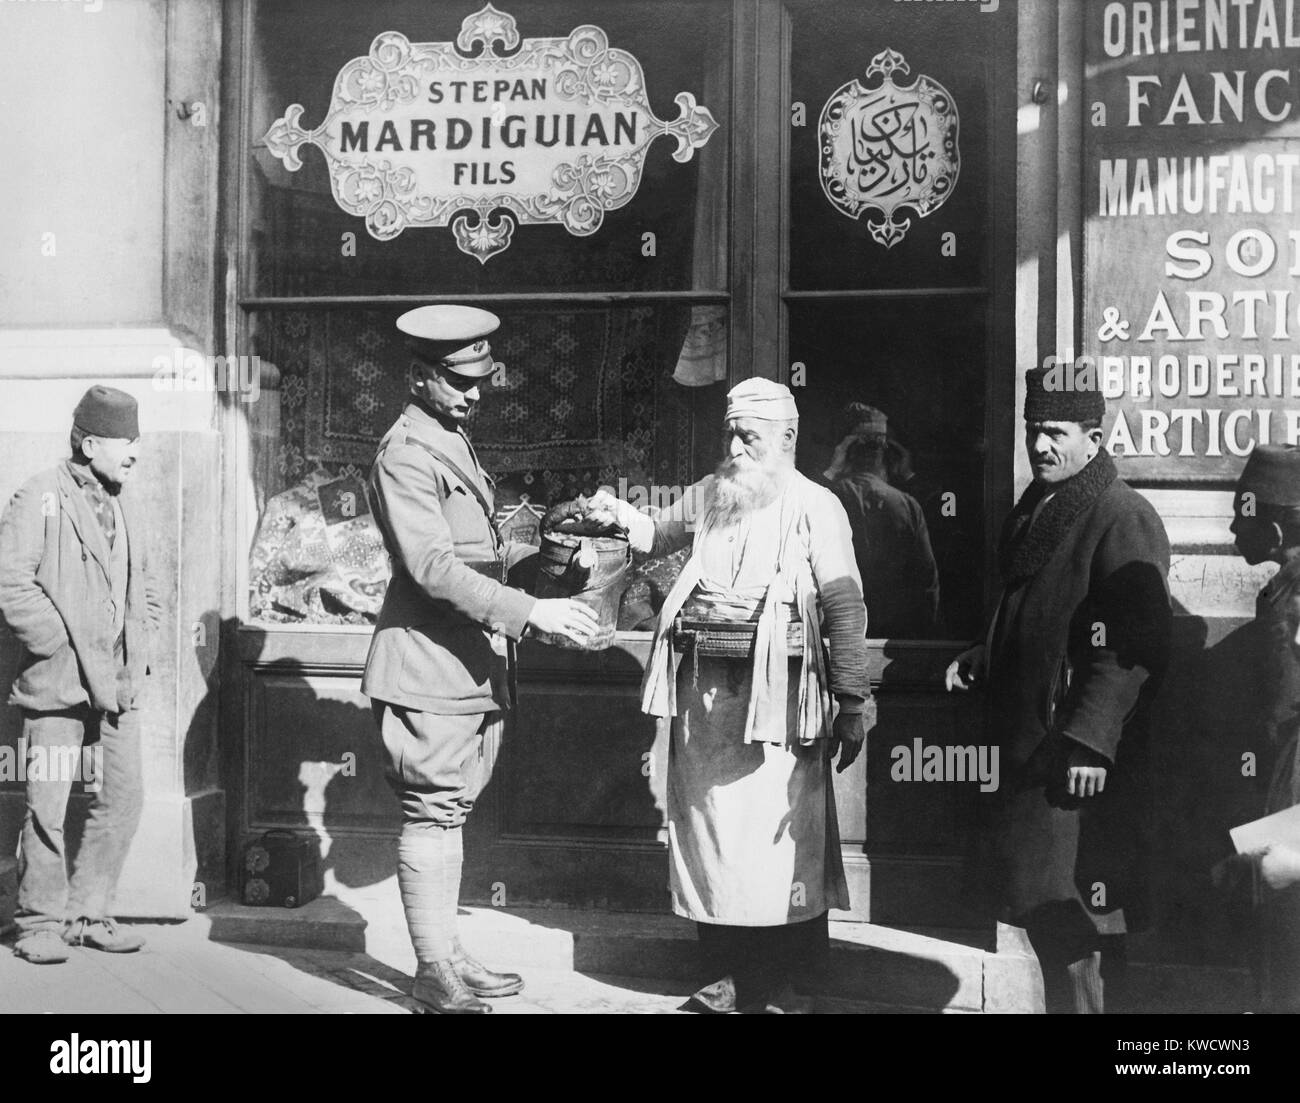 American solider of the Allied post-WW1 occupation forces in Istanbul in 1920. He is buying drinking water at 5 cents a glass from a street vendor to avoid typhoid and other diseases (BSLOC 2017 1 174) Stock Photo